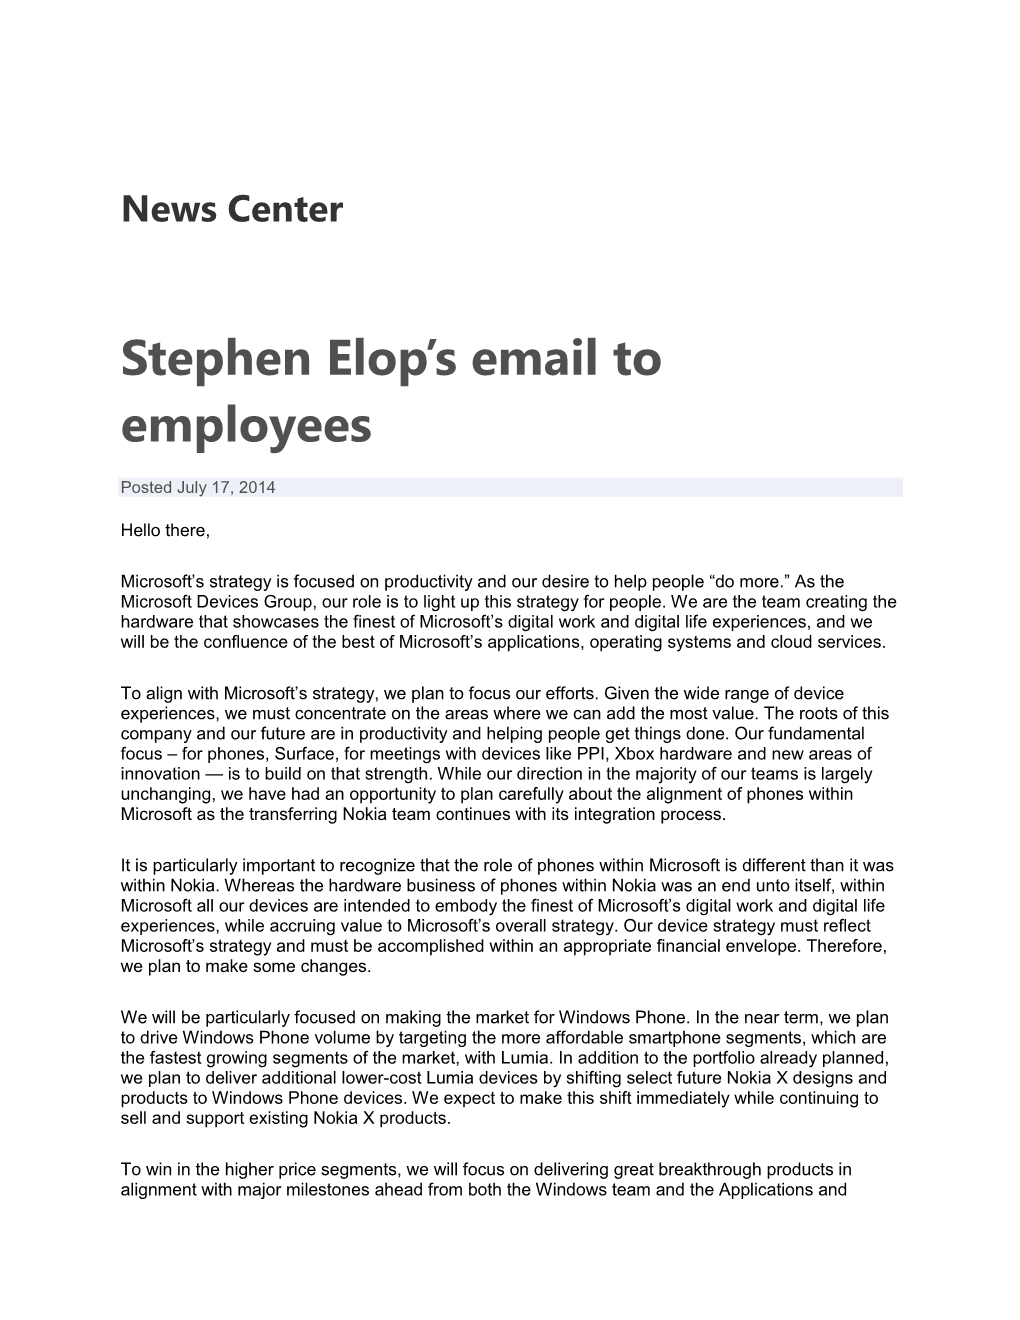 Stephen Elop's Email to Employees